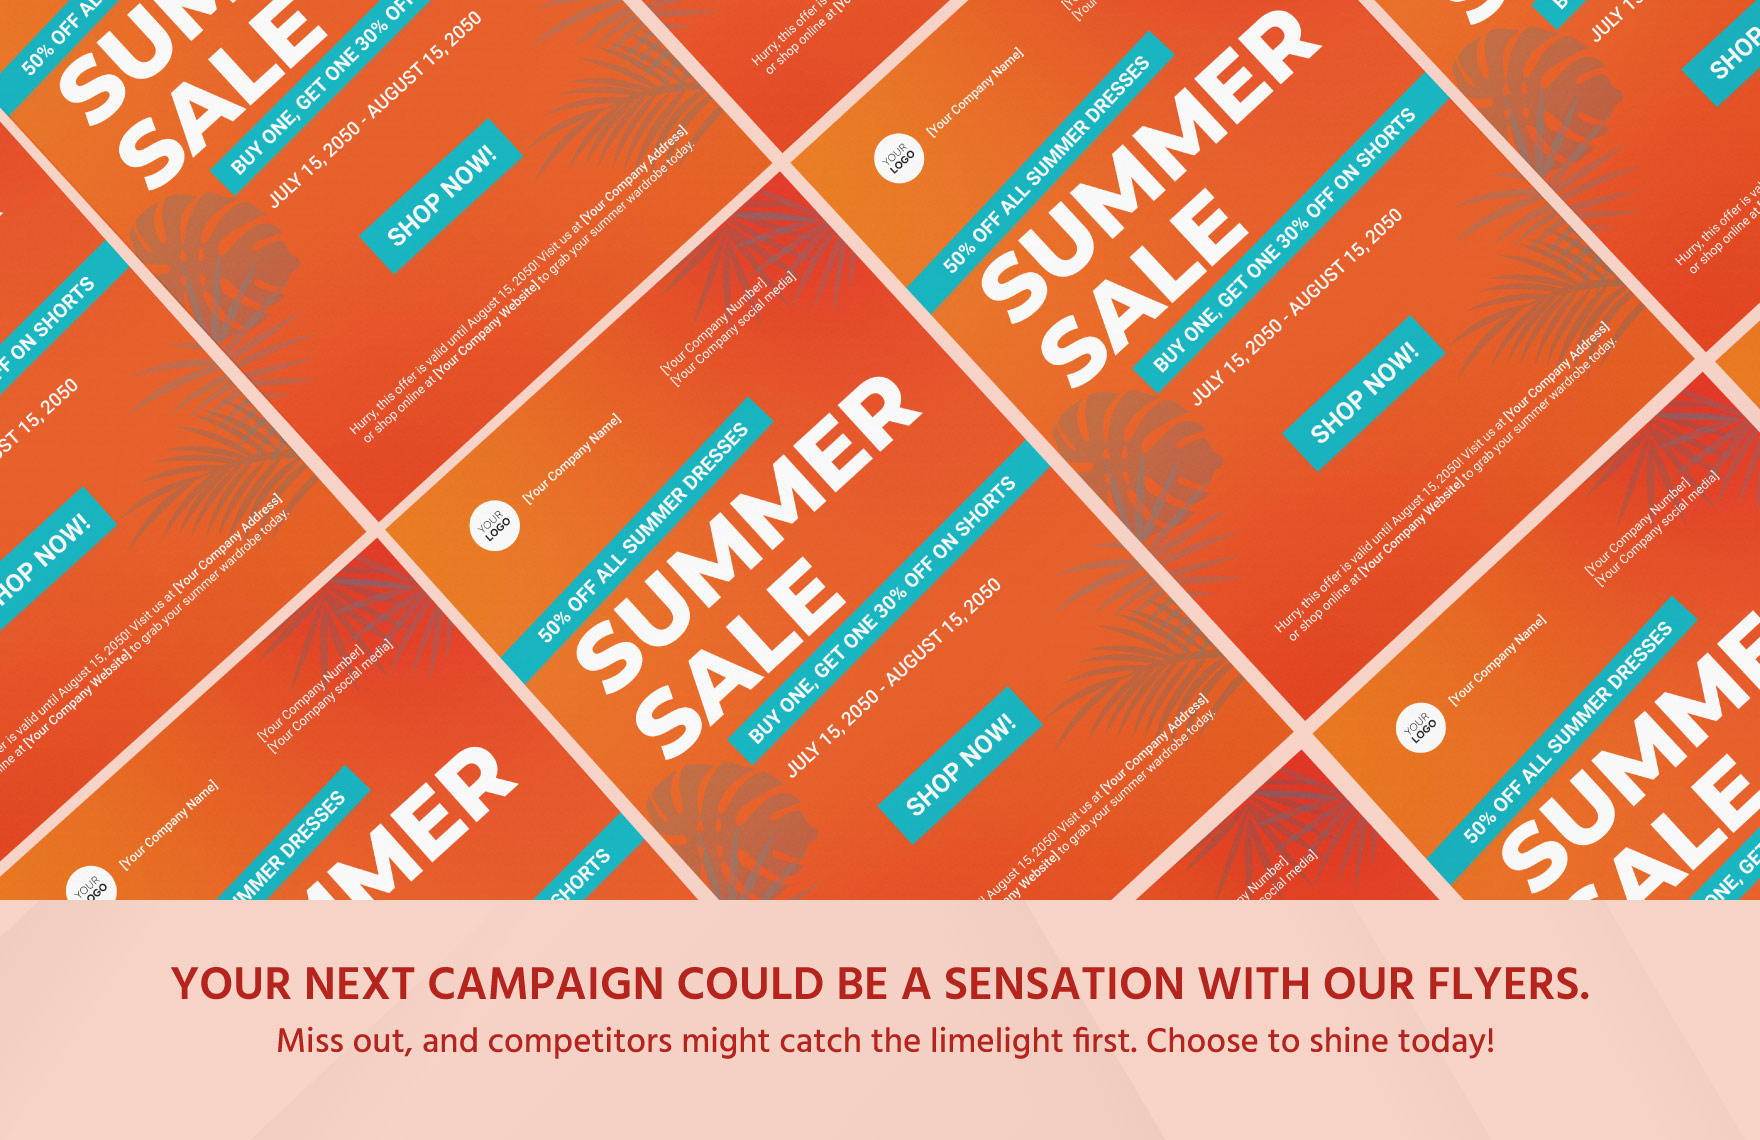 Special Promotion Flyer Template